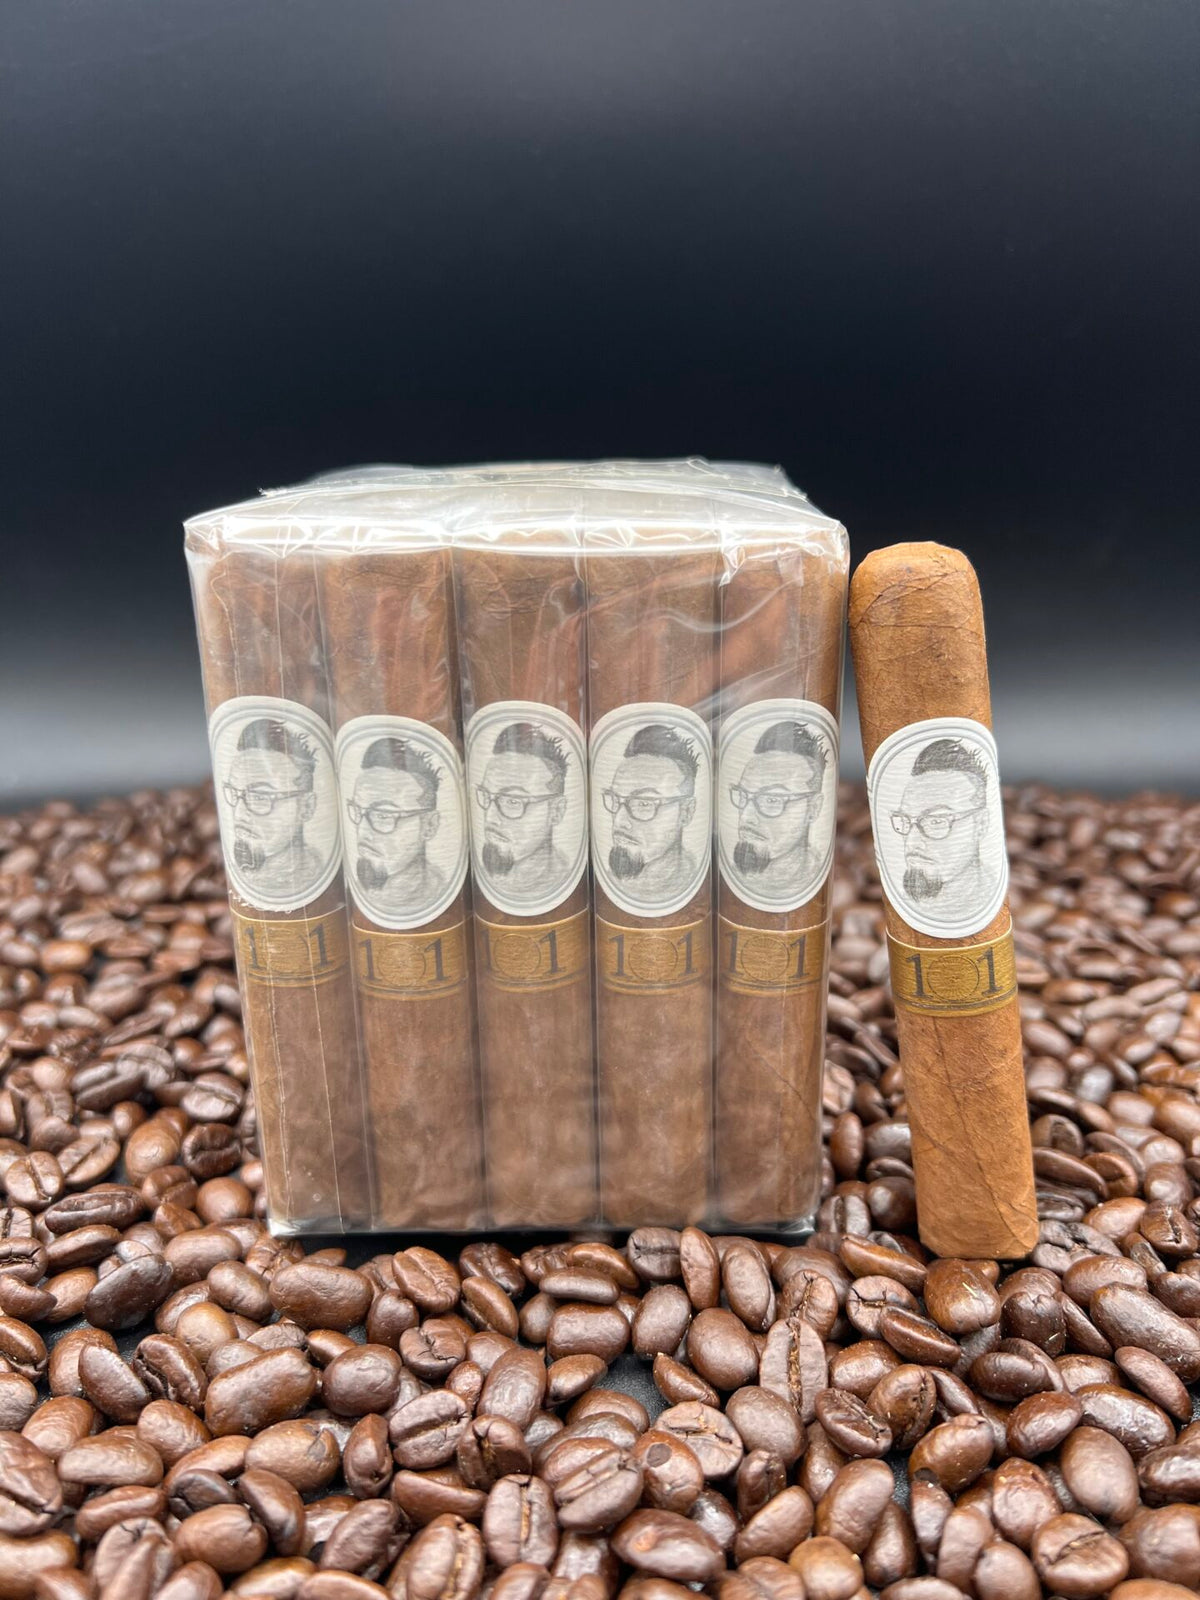 Caldwell/Room101 Golden Egg Papi Chulo cigars supplied by Sir Louis Cigars